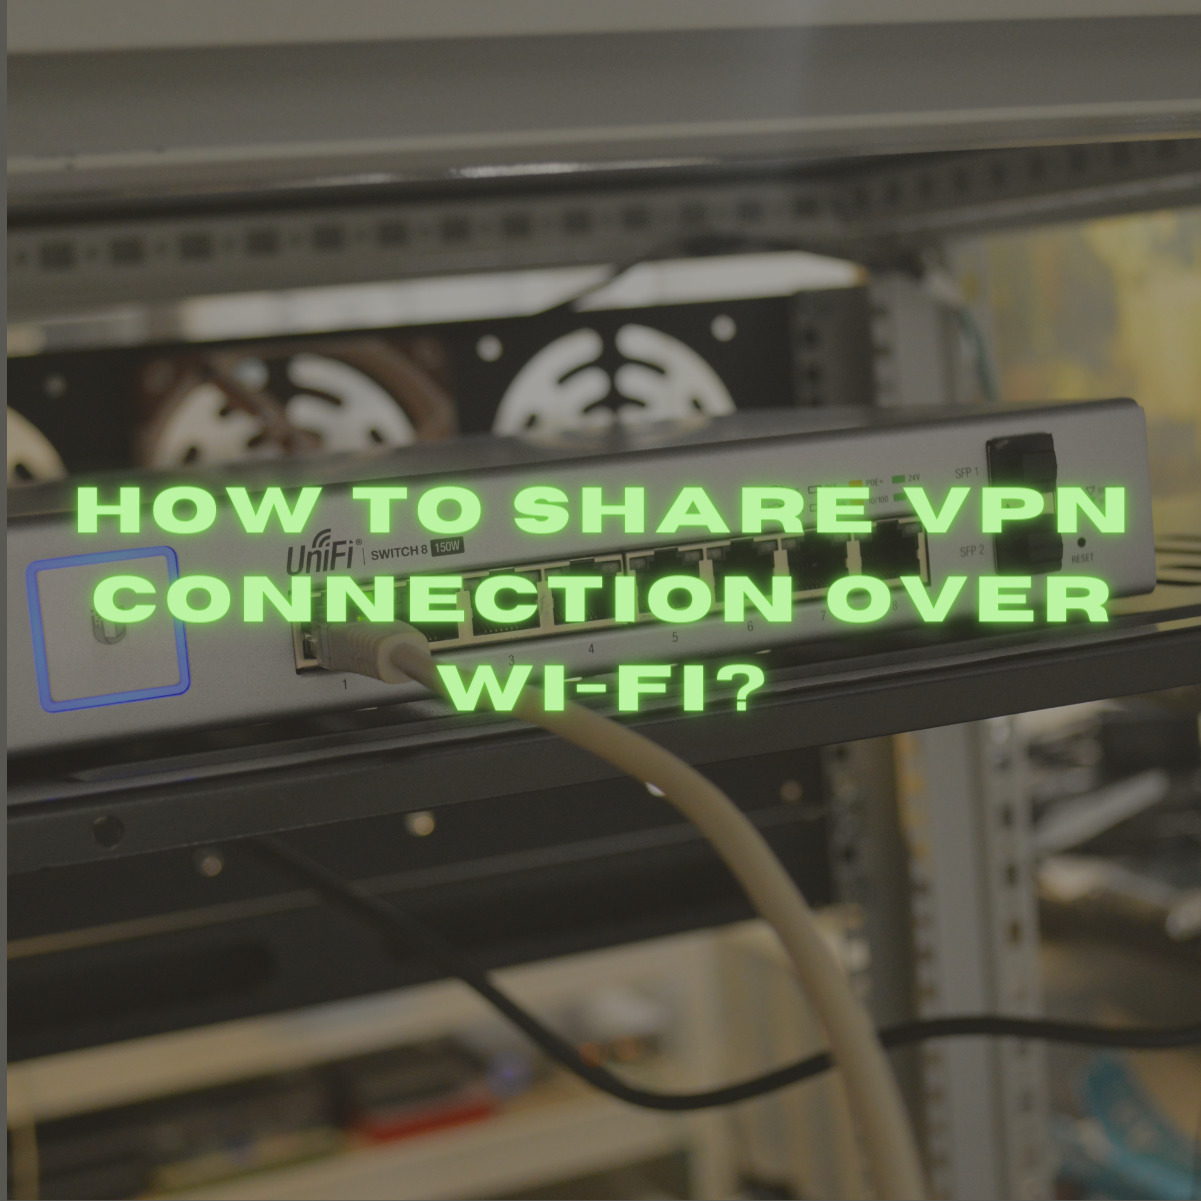 How to Share VPN Connection Over Wi-Fi